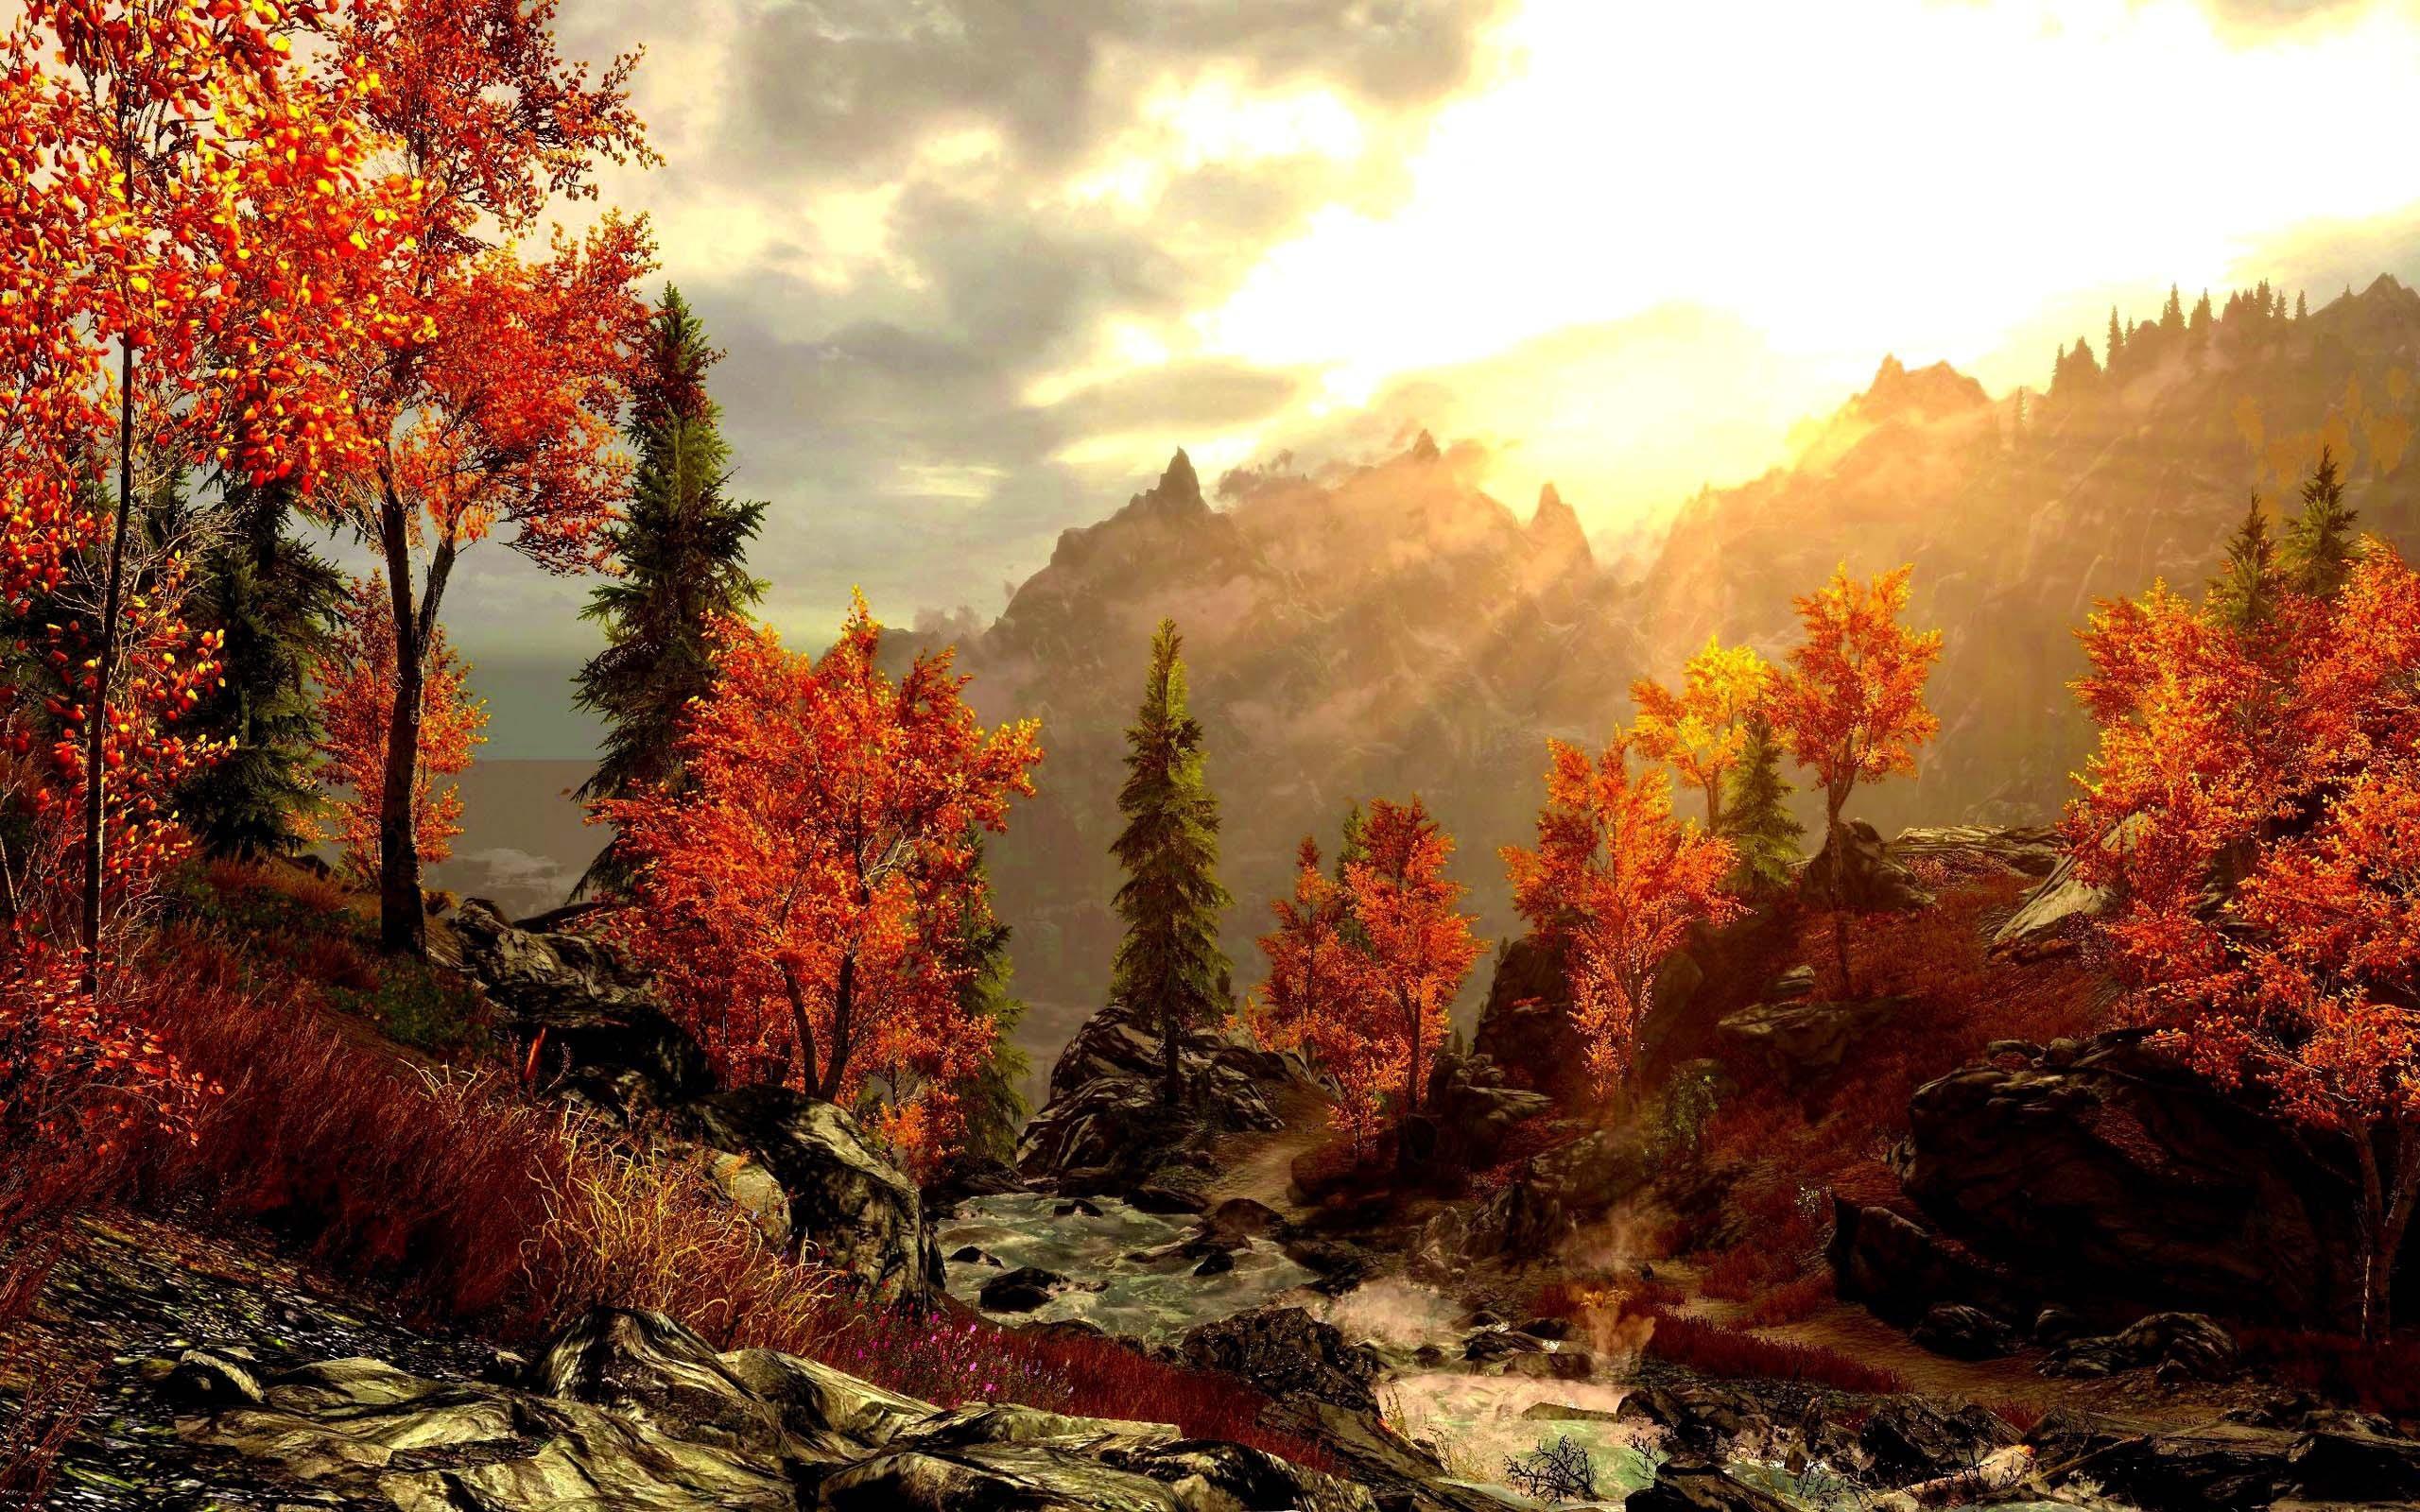 Autumn in the mountains Wallpaper